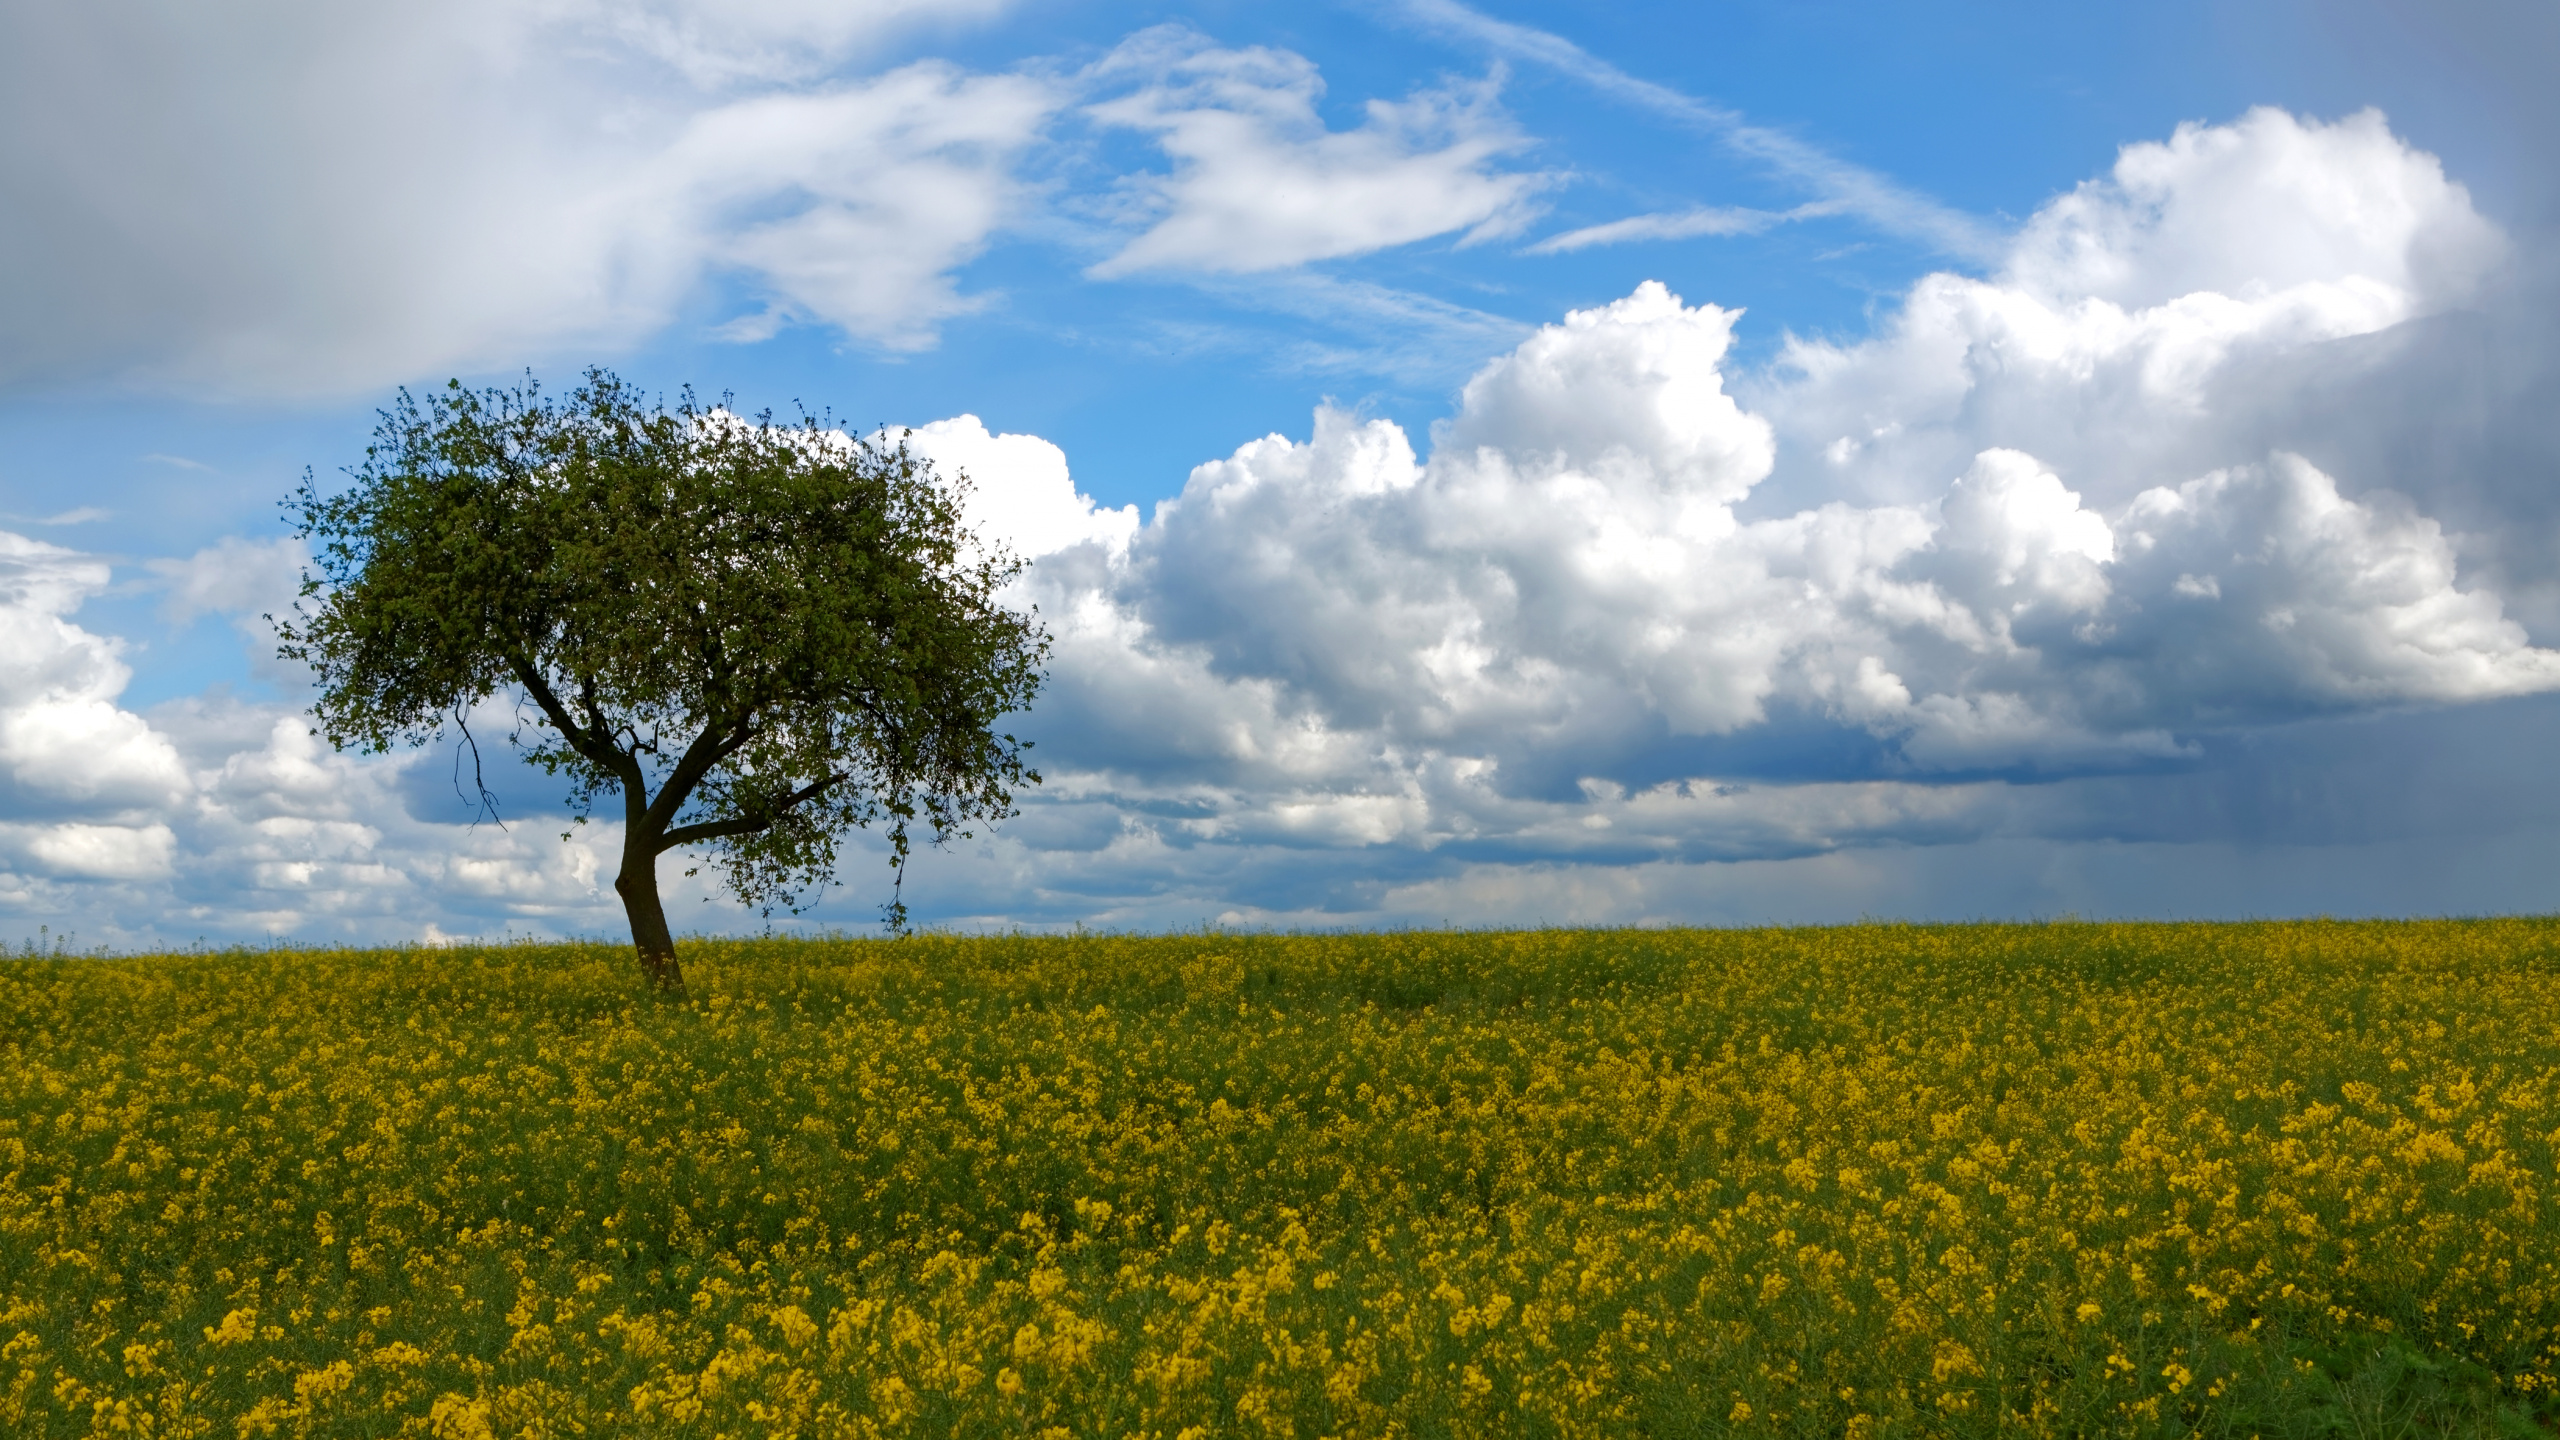 Green Grass Field Under Blue Sky and White Clouds During Daytime. Wallpaper in 2560x1440 Resolution